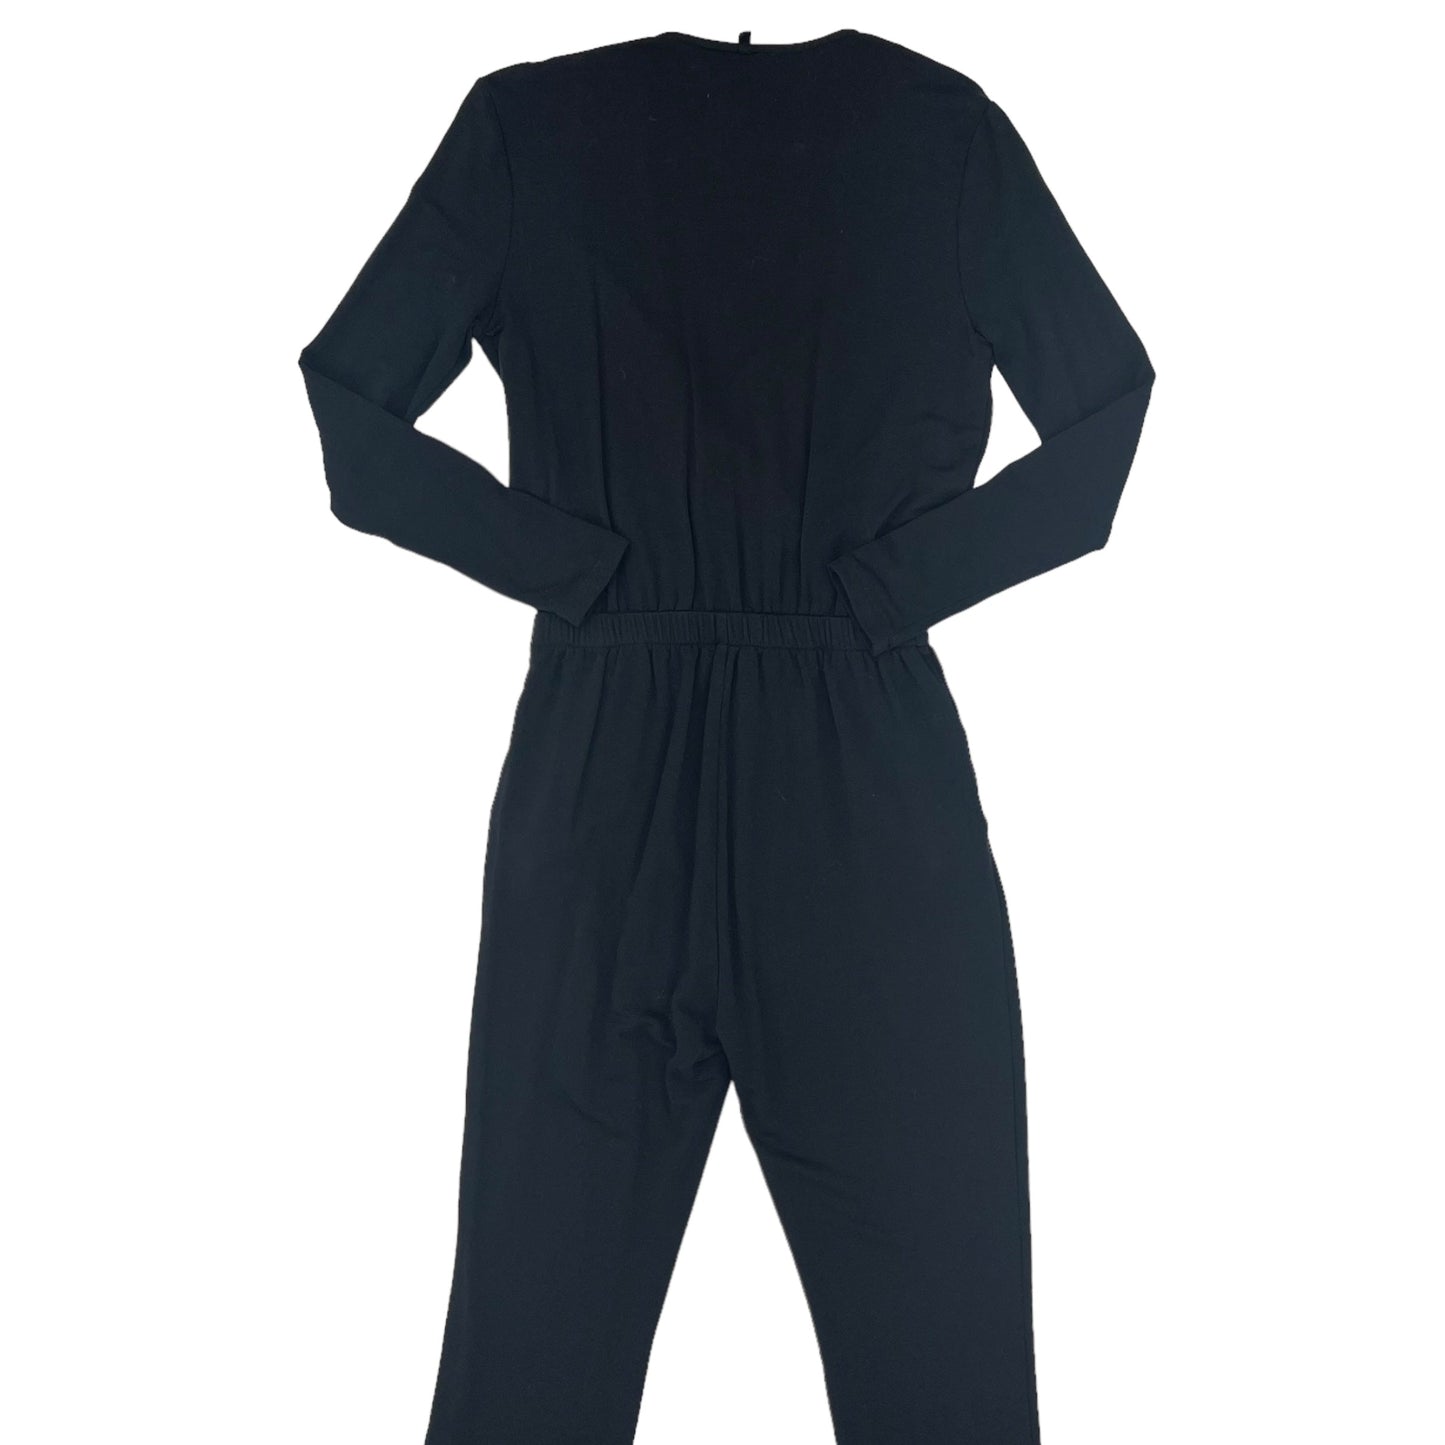 BLACK LOU AND GREY JUMPSUIT, Size XS